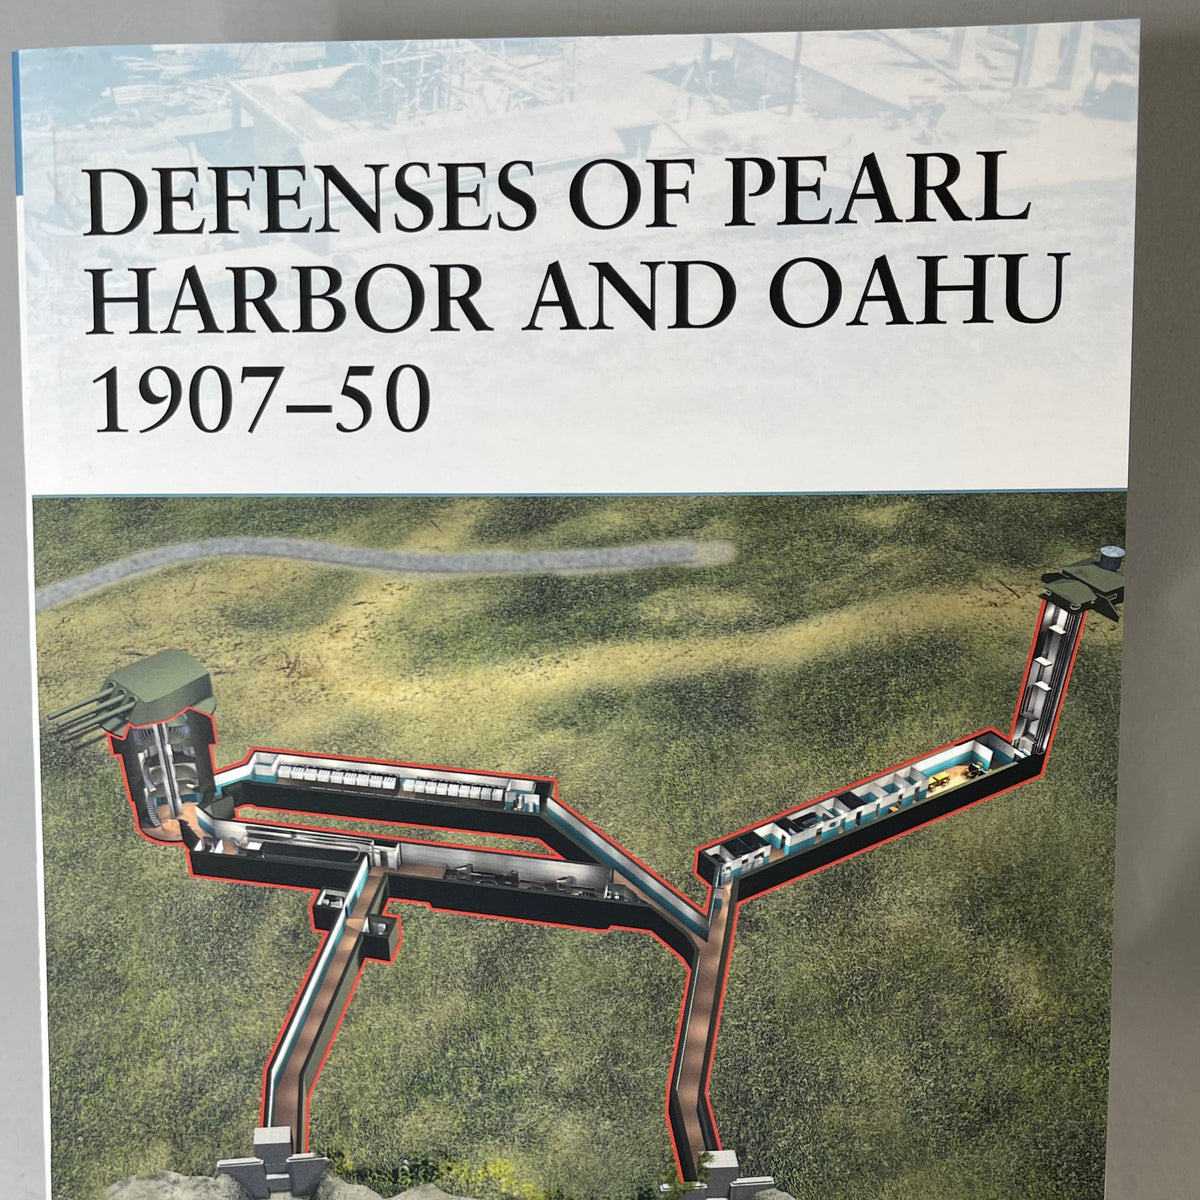 Defenses of Pearl Harbor and Oahu